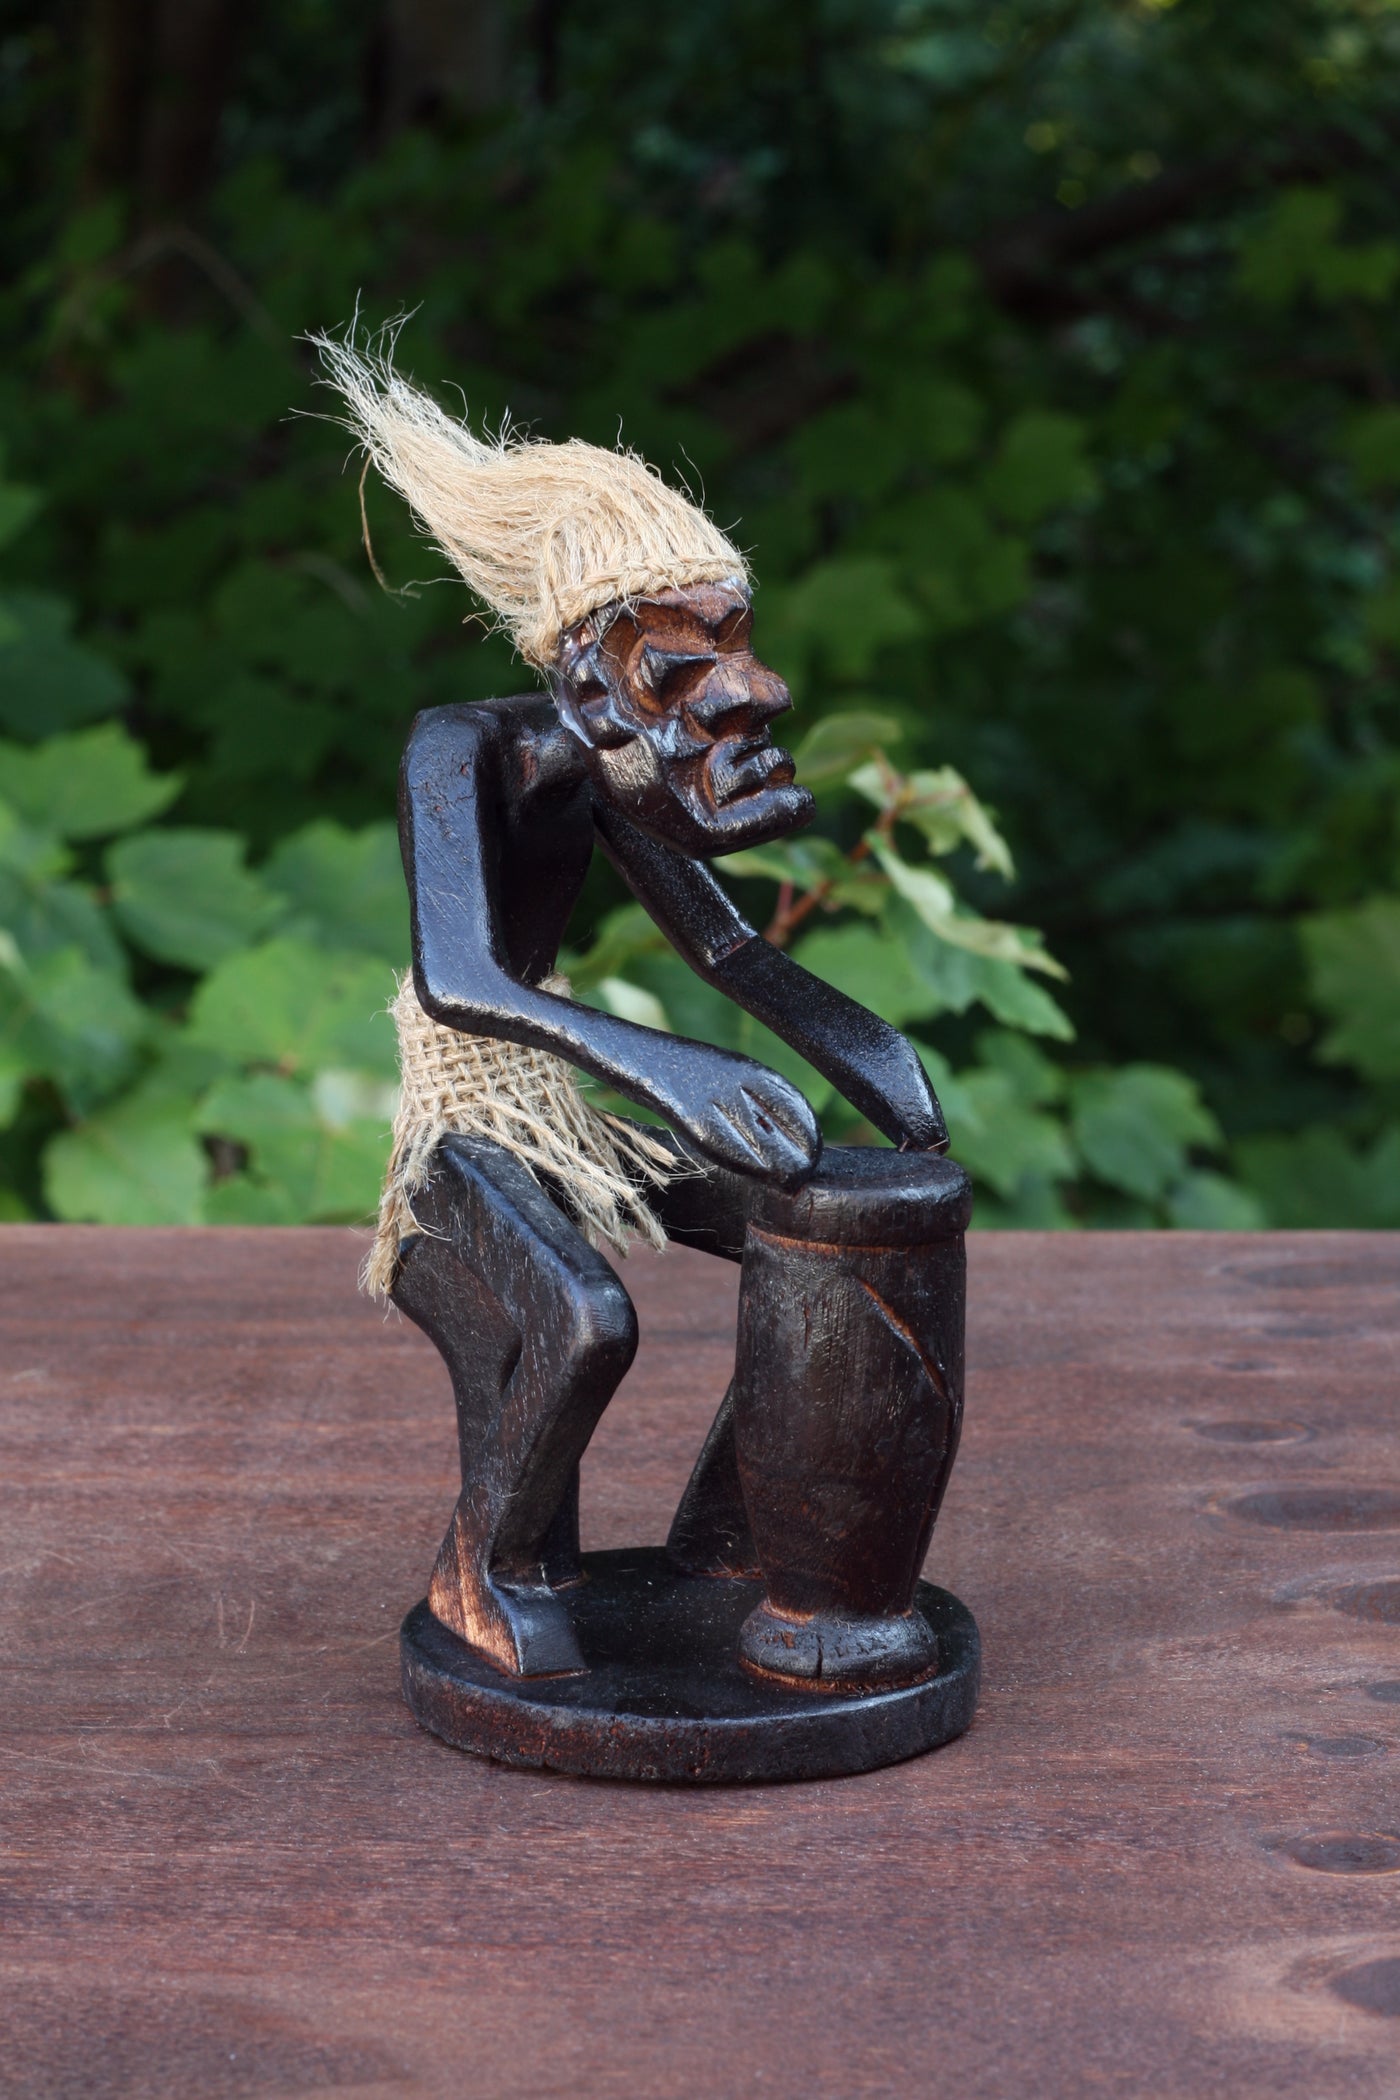 Handmade Wooden Primitive Tribal Playing Djembe Drum Figurine Statue Funny Sculpture Tiki Bar Handcrafted Unique Gift Decor Accent Figurine Hand Carved